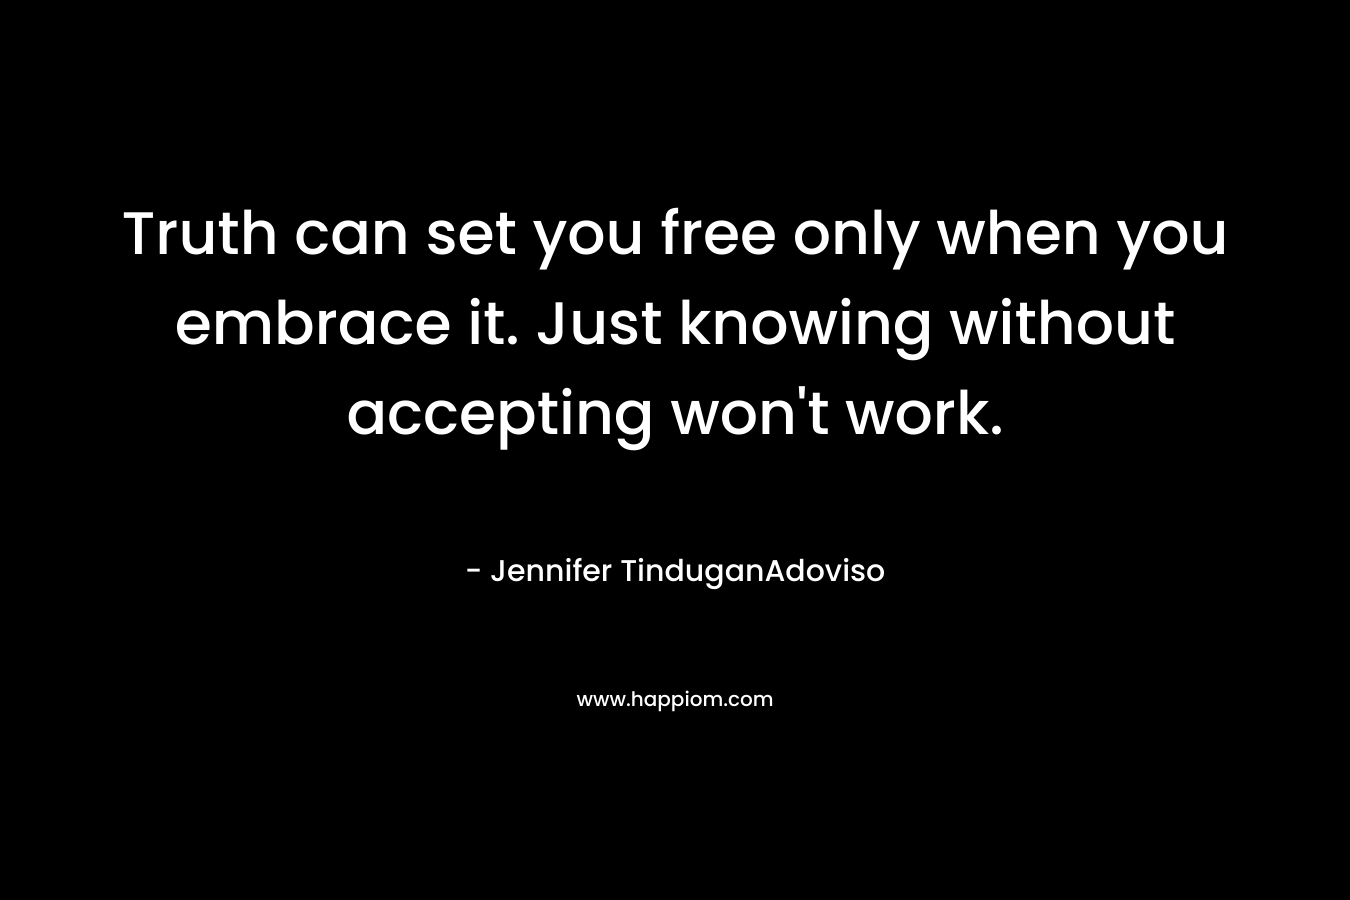 Truth can set you free only when you embrace it. Just knowing without accepting won't work.